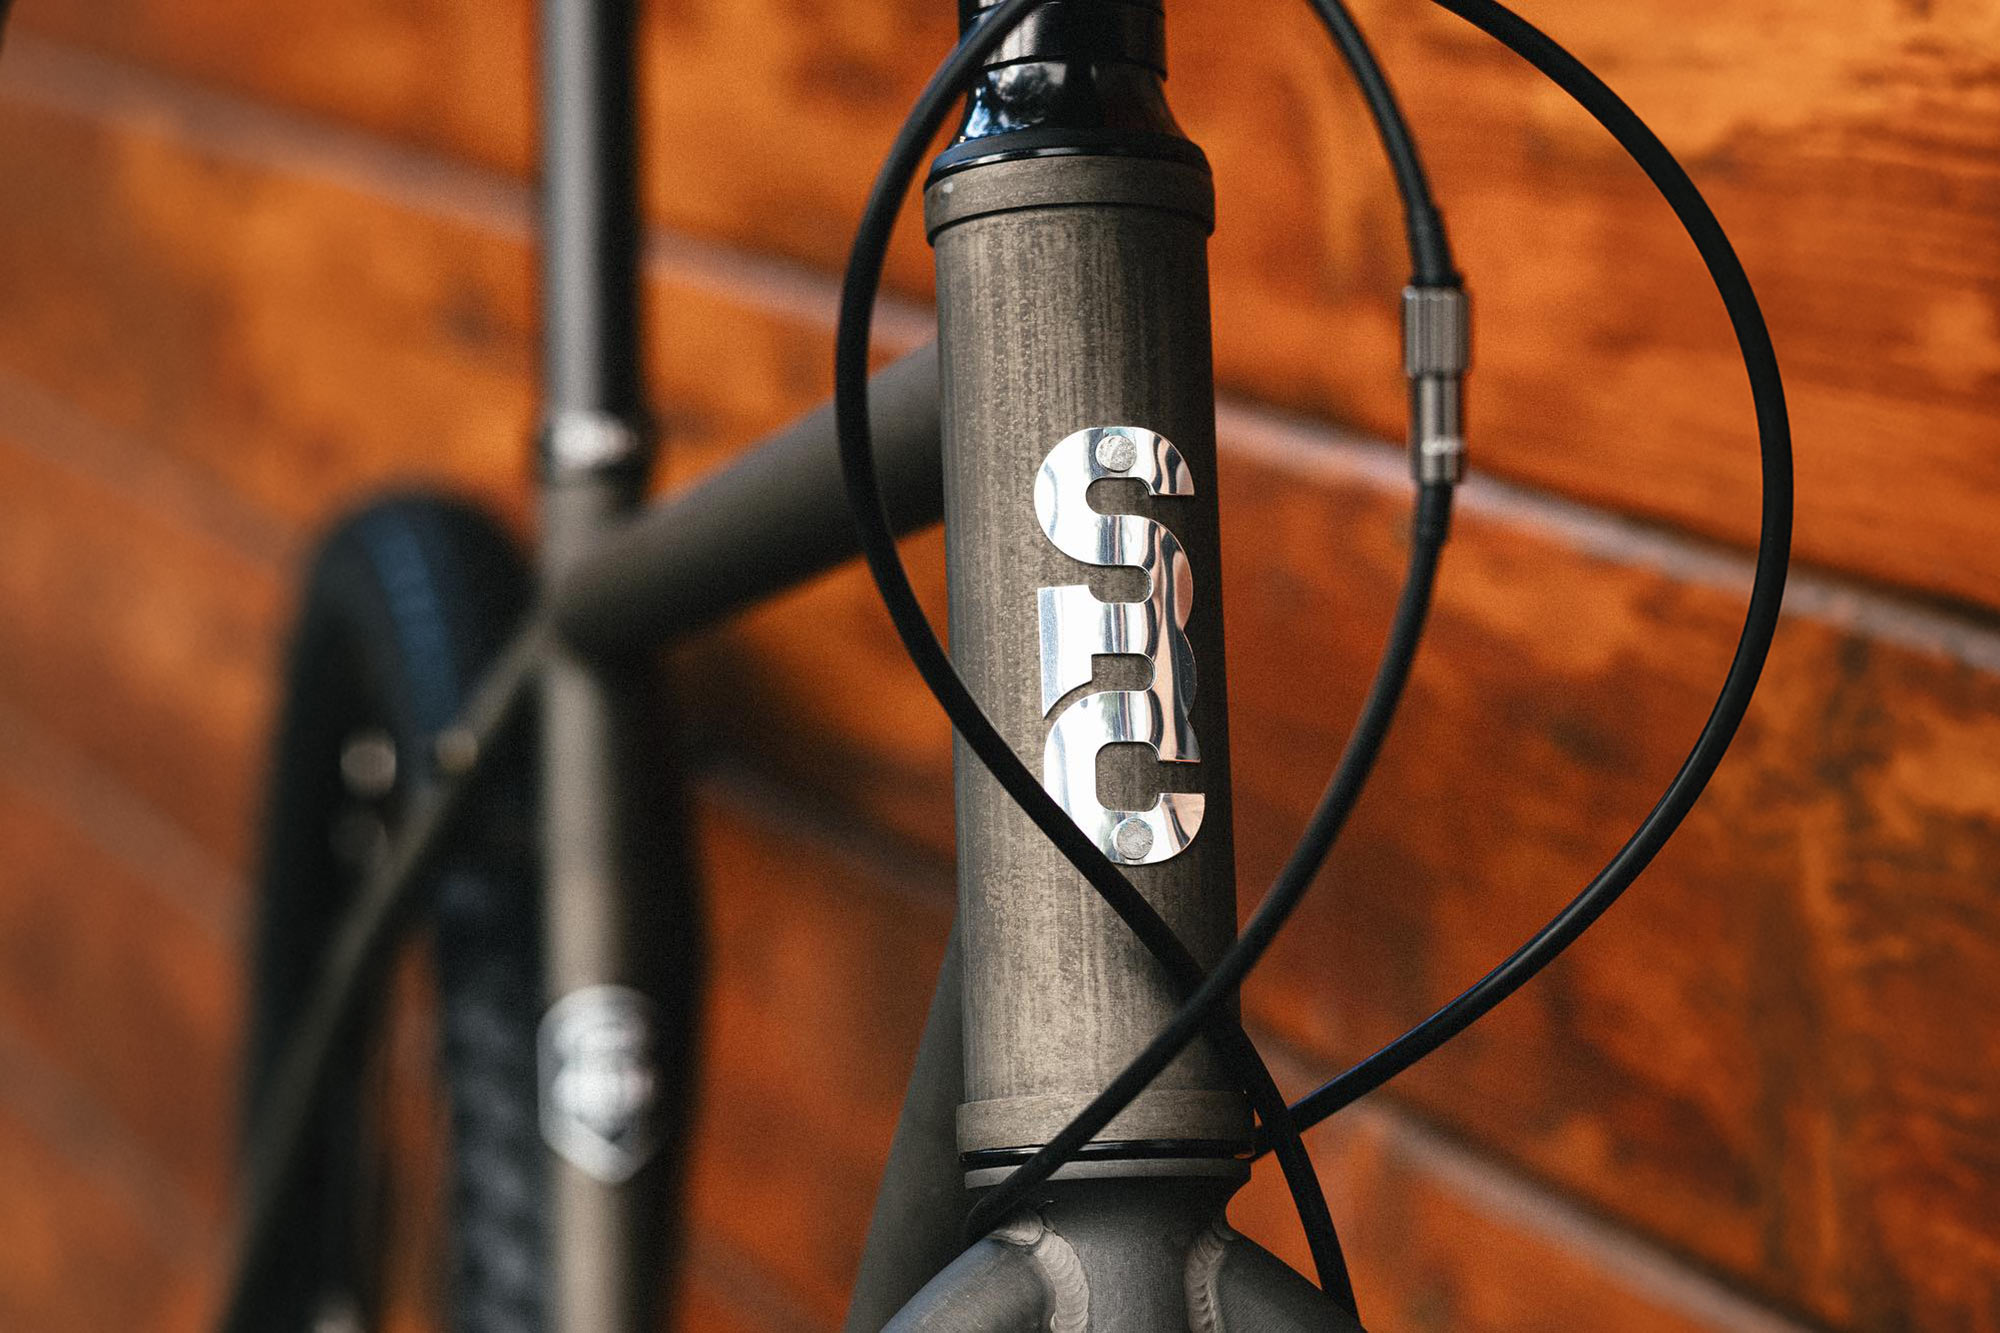 State Bicycle Co. 4130 All-Road Raw affordable steel gravel bike headbadge